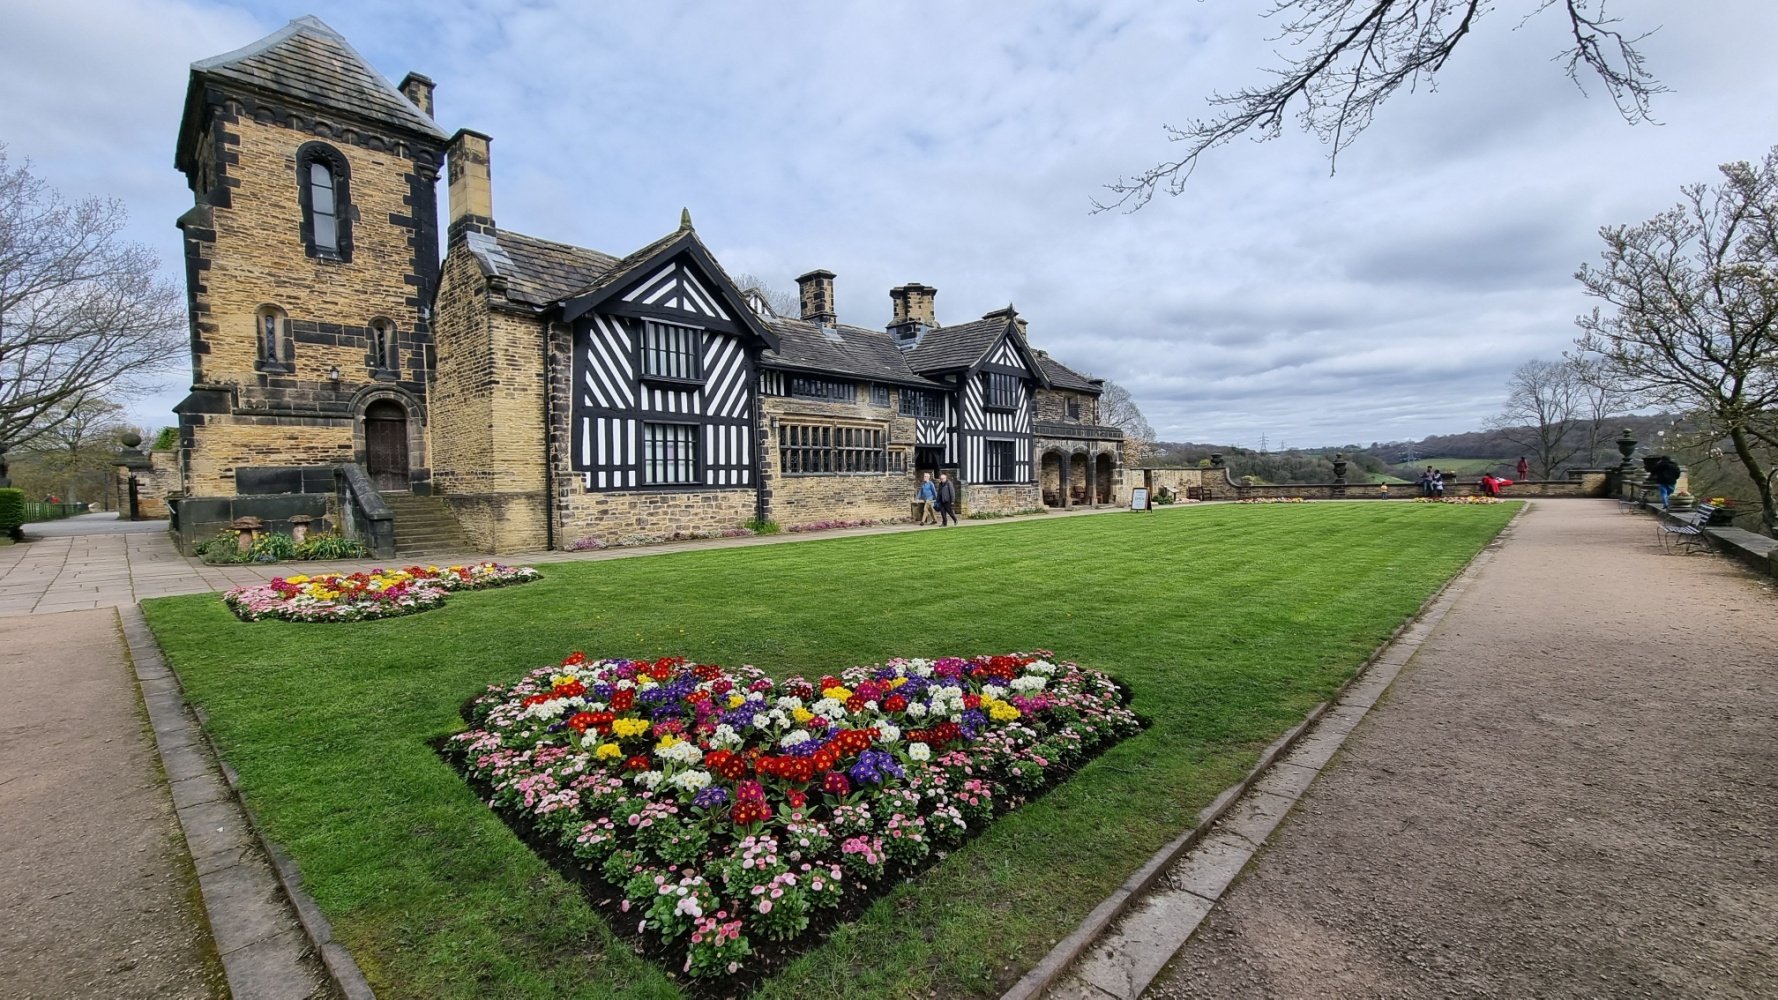 Image name shibden hall halifax west yorkshire the 25 image from the post A look at the history of Shibden Hall, with Dr Emma Wells in Yorkshire.com.